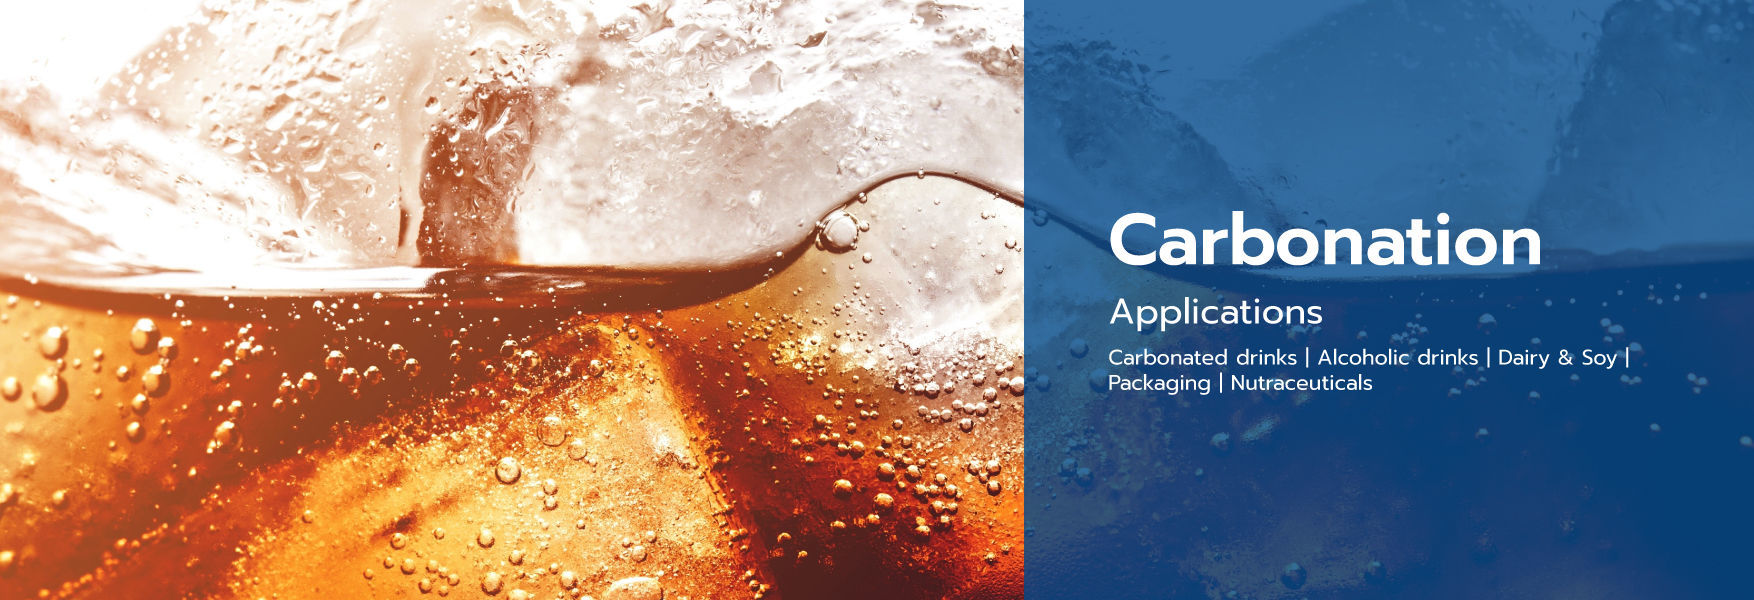 Carbonation Applications  Carbonated drinks | Alcoholic drinks | Dairy & Soy | Packaging | Nutraceut